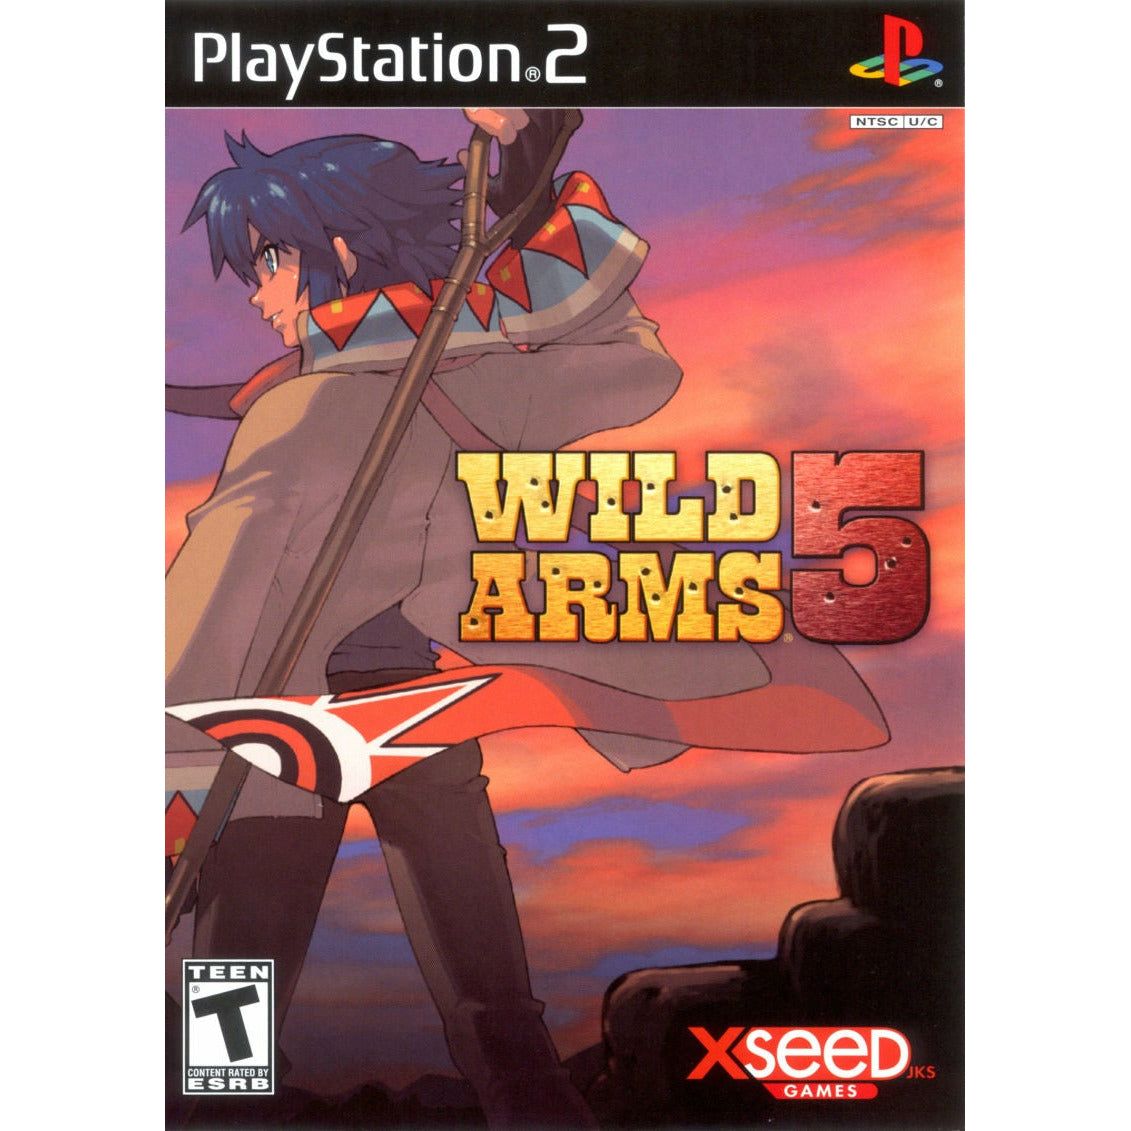 PS2 - Wild Arms 5 - Series 10th Anniversary Edition